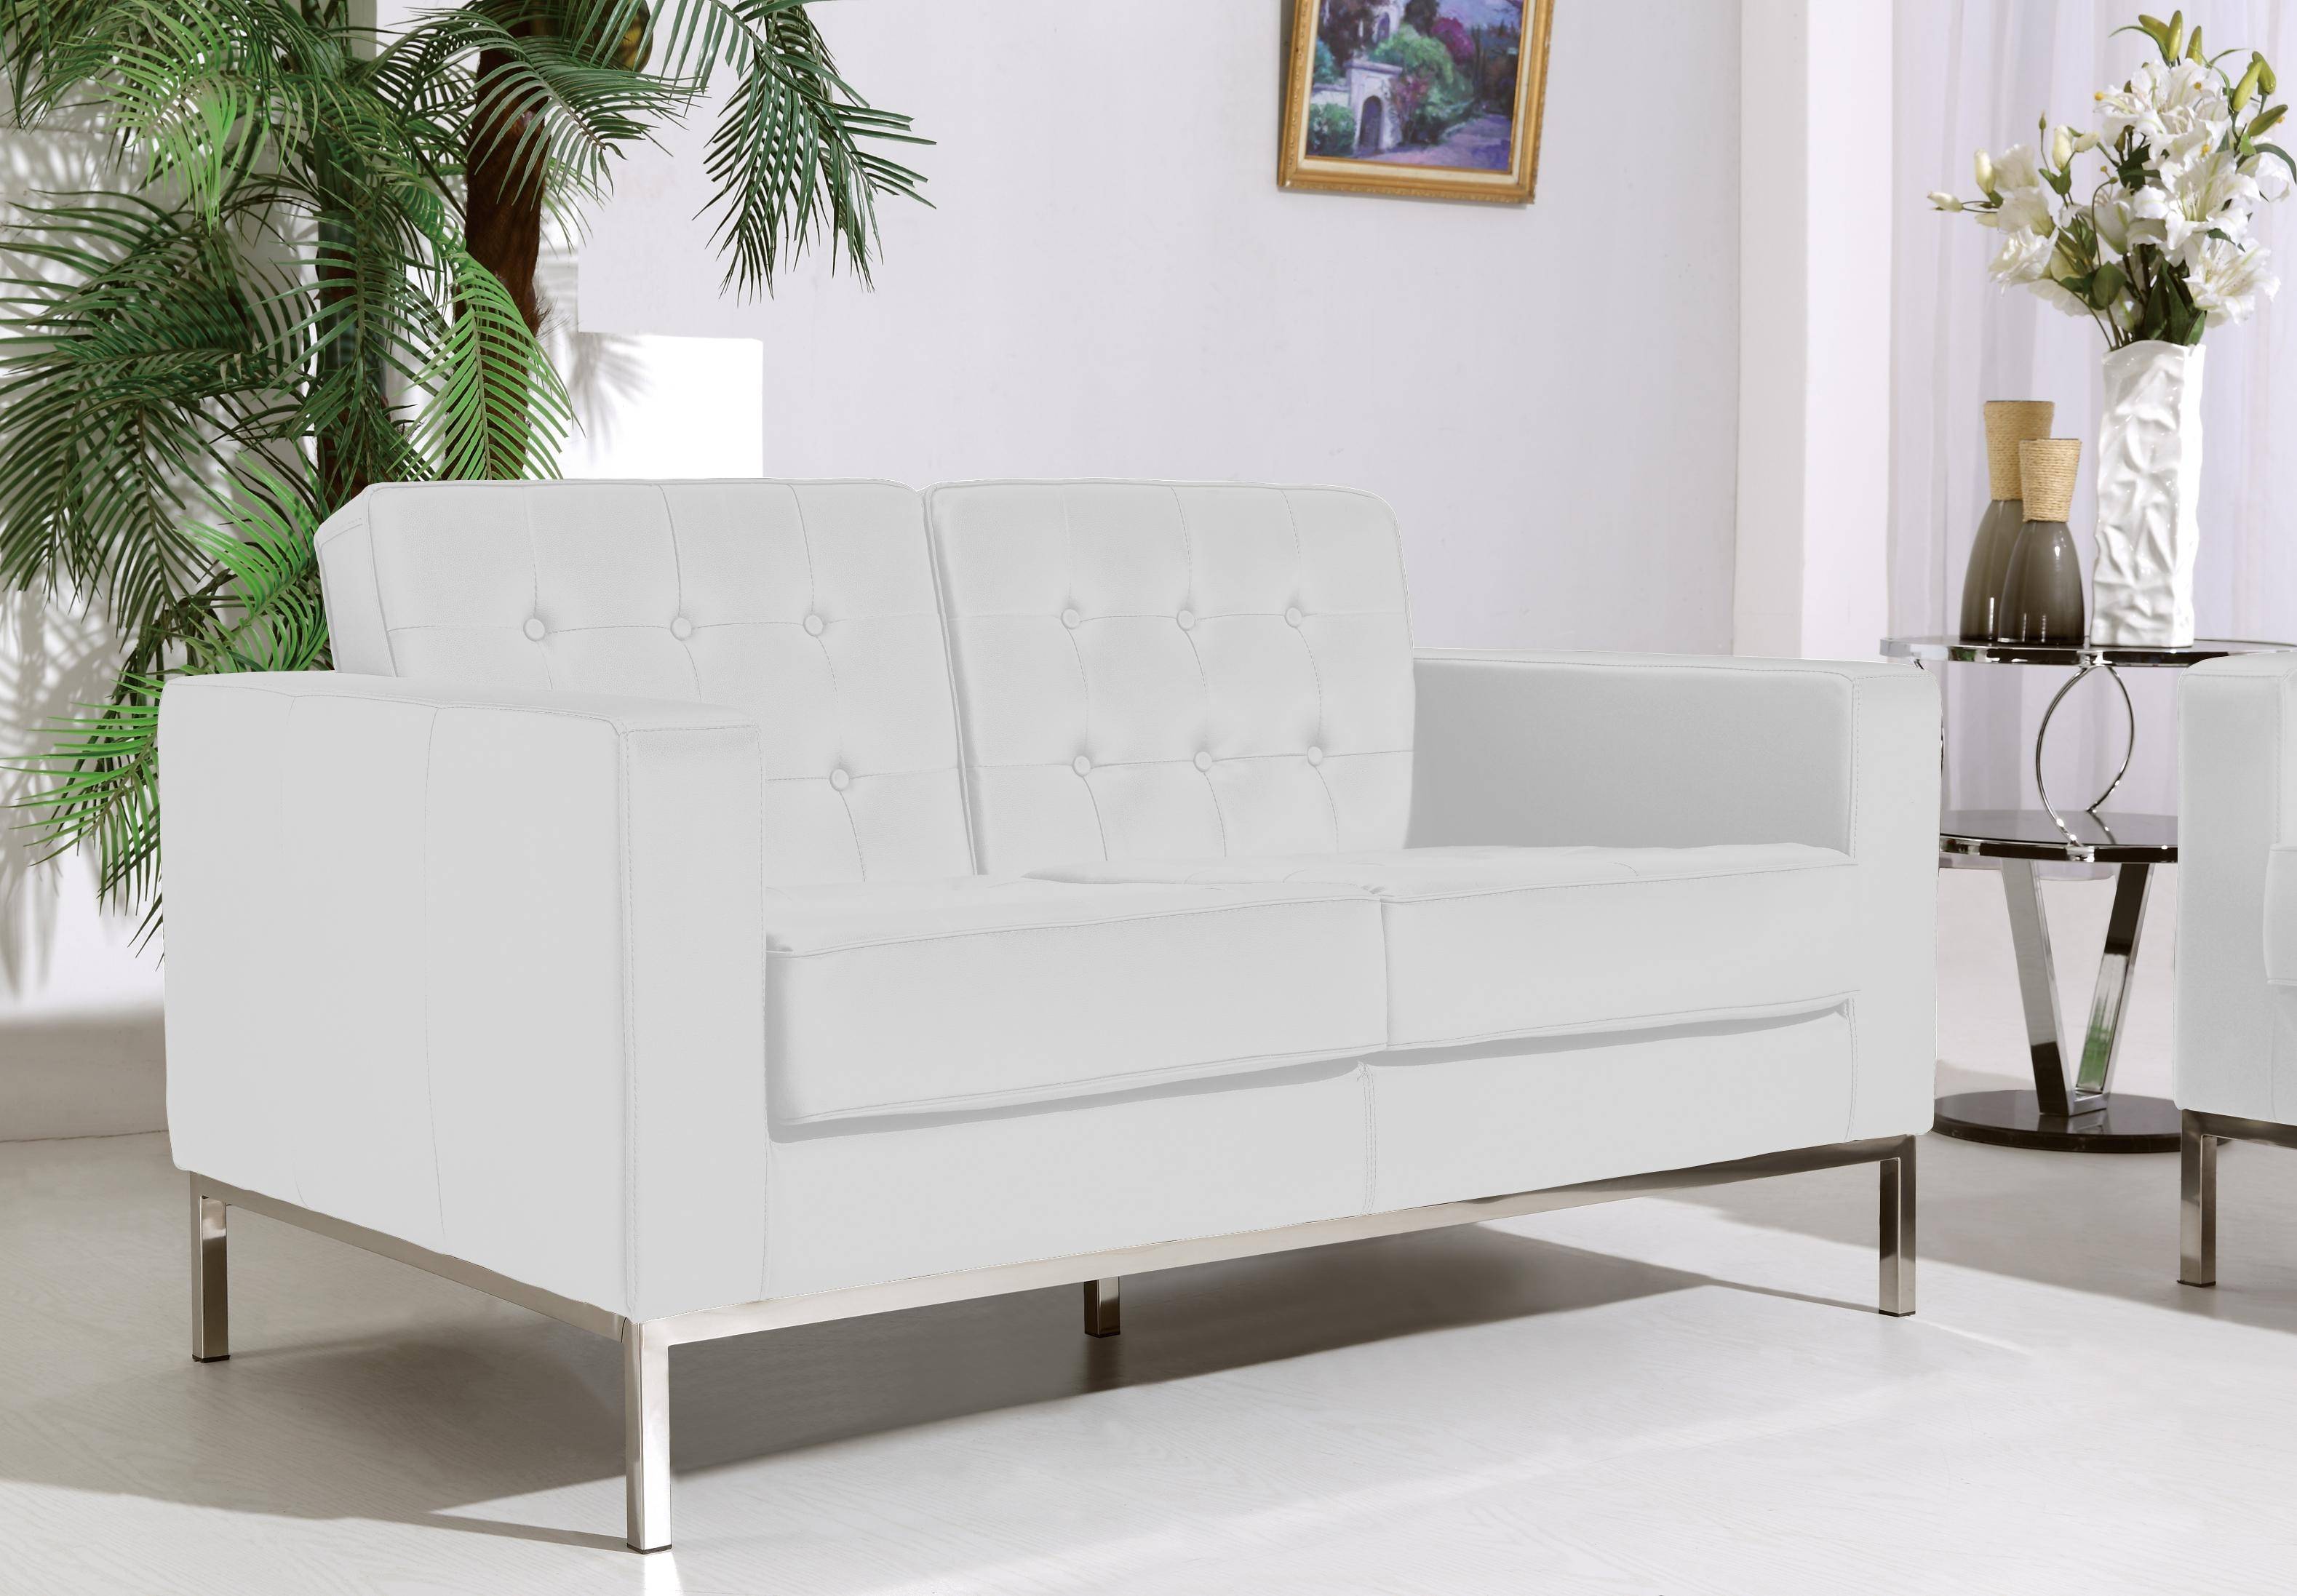 Silvania Loveseat In White Leather, White Leather Loveseat Modern